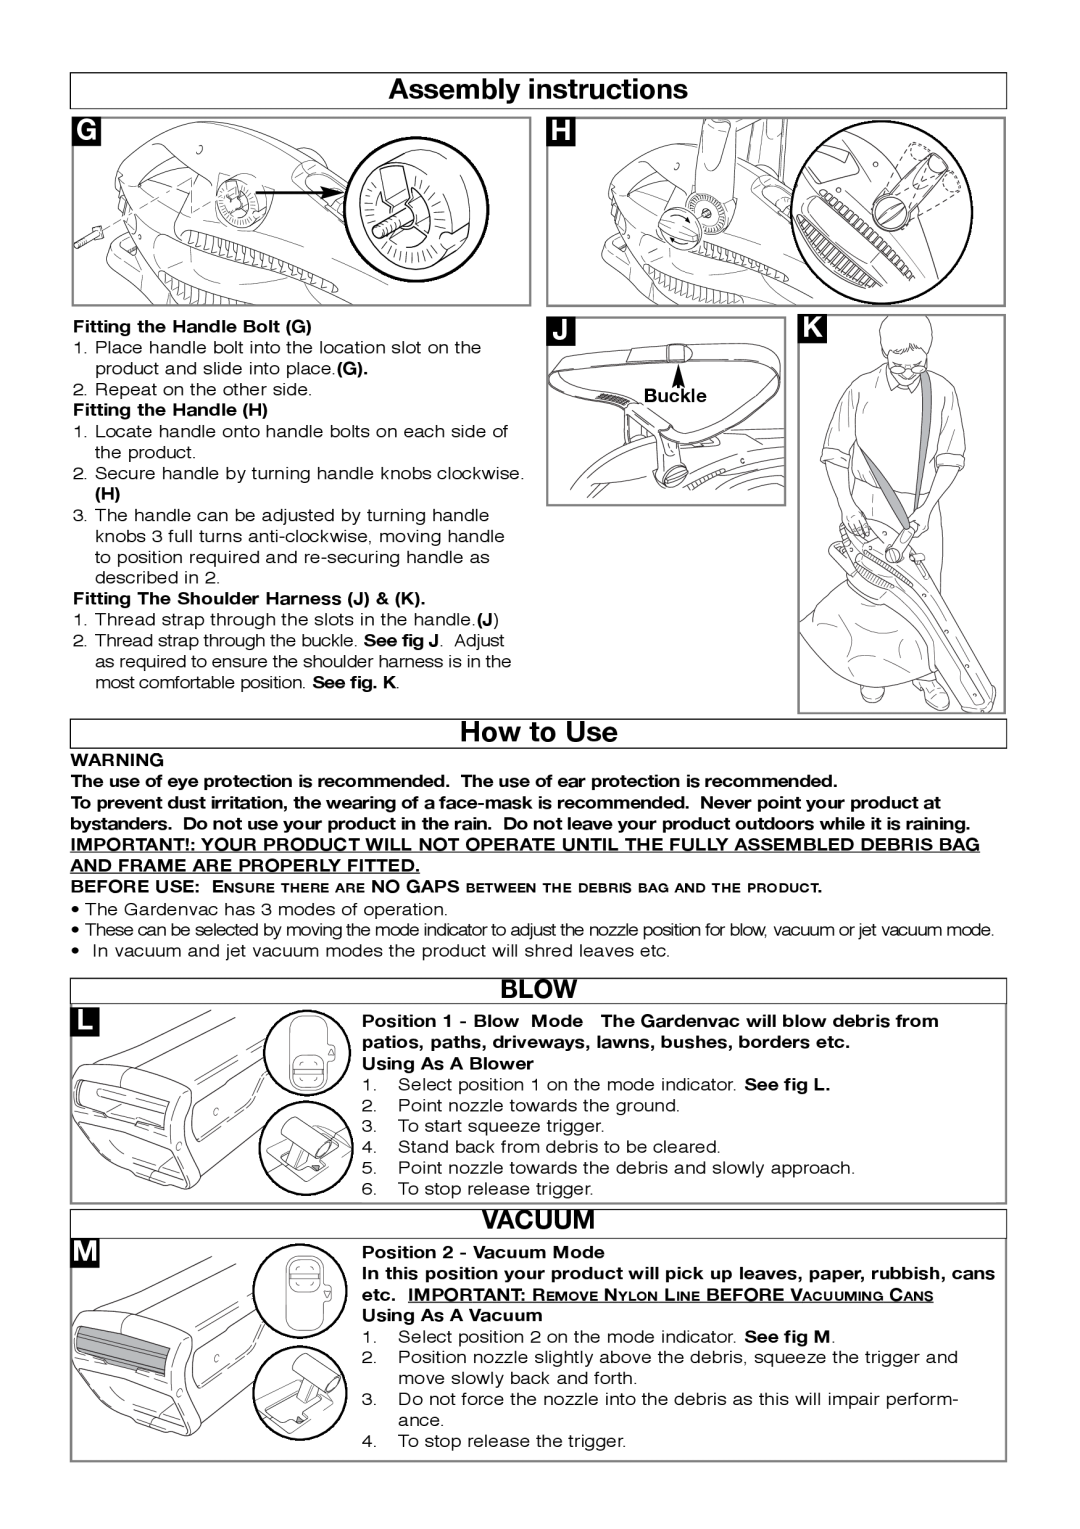 Flymo Garden Vac manual Assembly instructions, How to Use, Blow, Vacuum, Buckle 